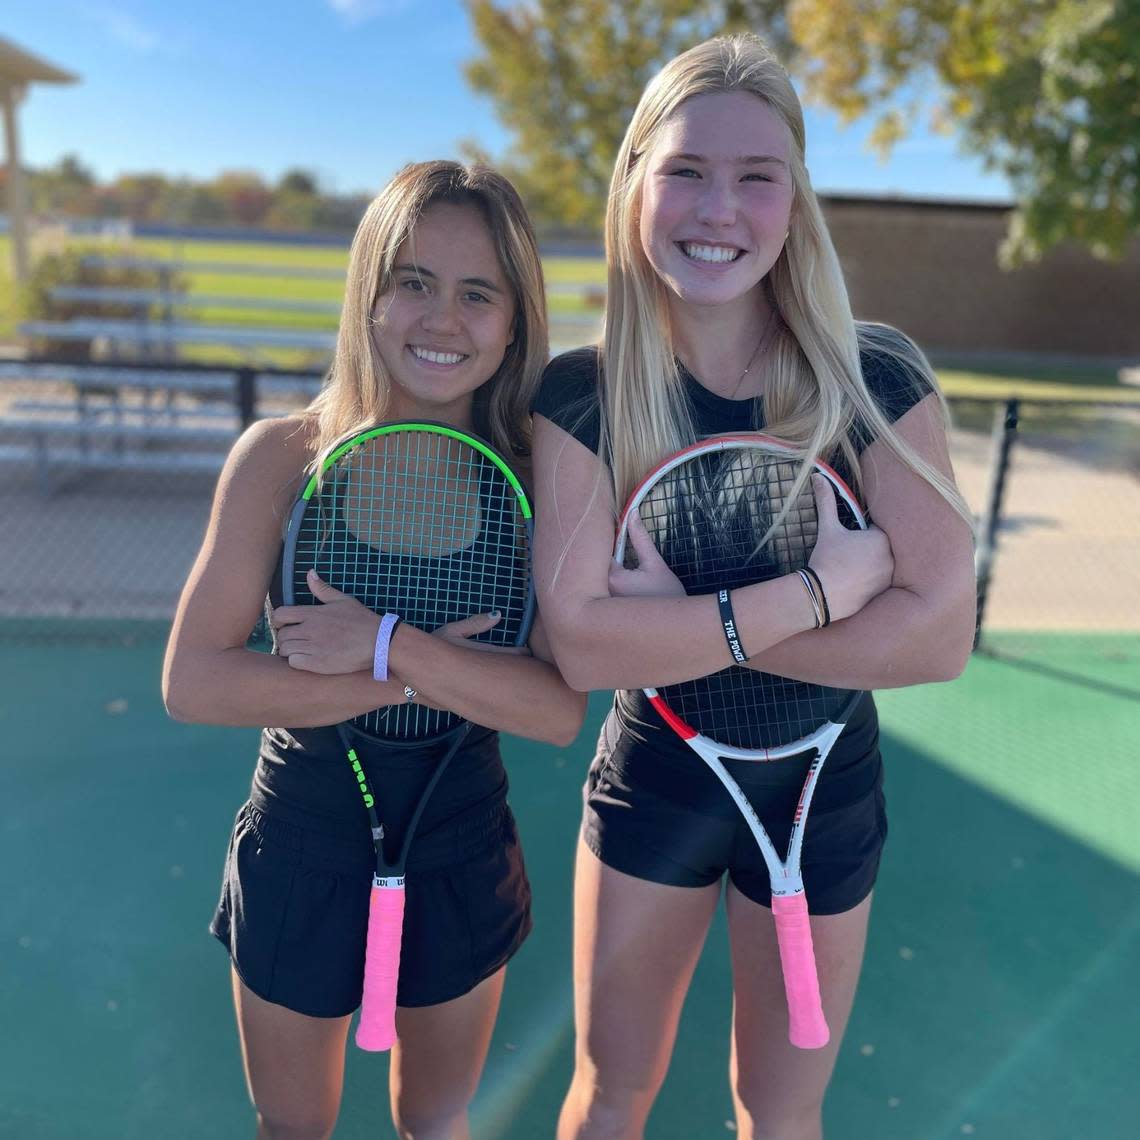 The Andover Central doubles team of senior Maya Chon, left, and sophomore Bryer Geoffroy, right.